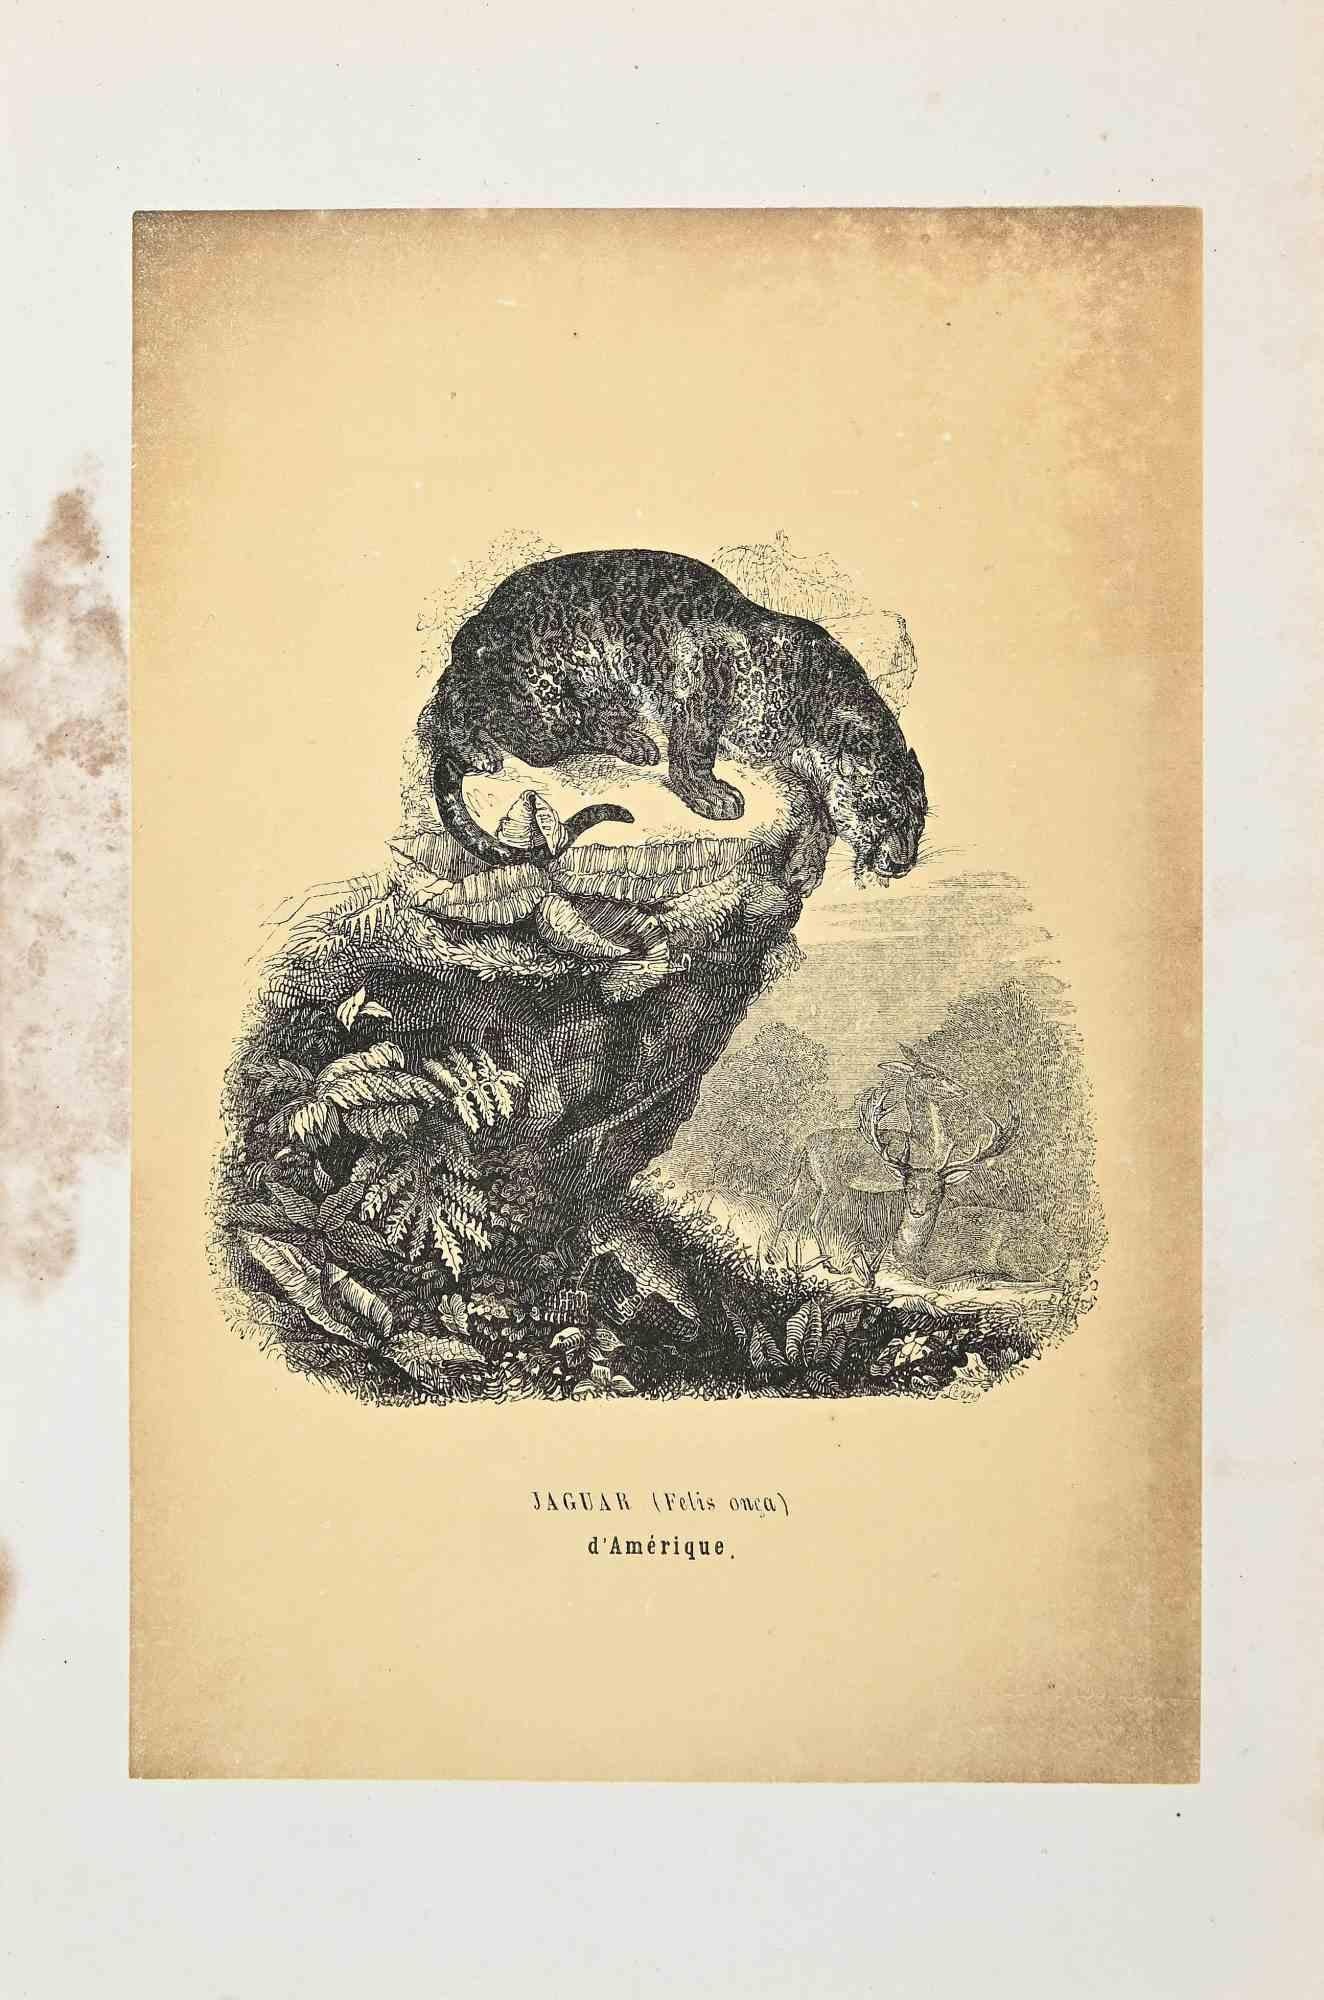 Jaguar is an original lithograph on ivory-colored paper, realized by Paul Gervais (1816-1879). The artwork is from The Series of "Les Trois Règnes de la Nature", and was published in 1854.

Good conditions except for some fixings and the sign of